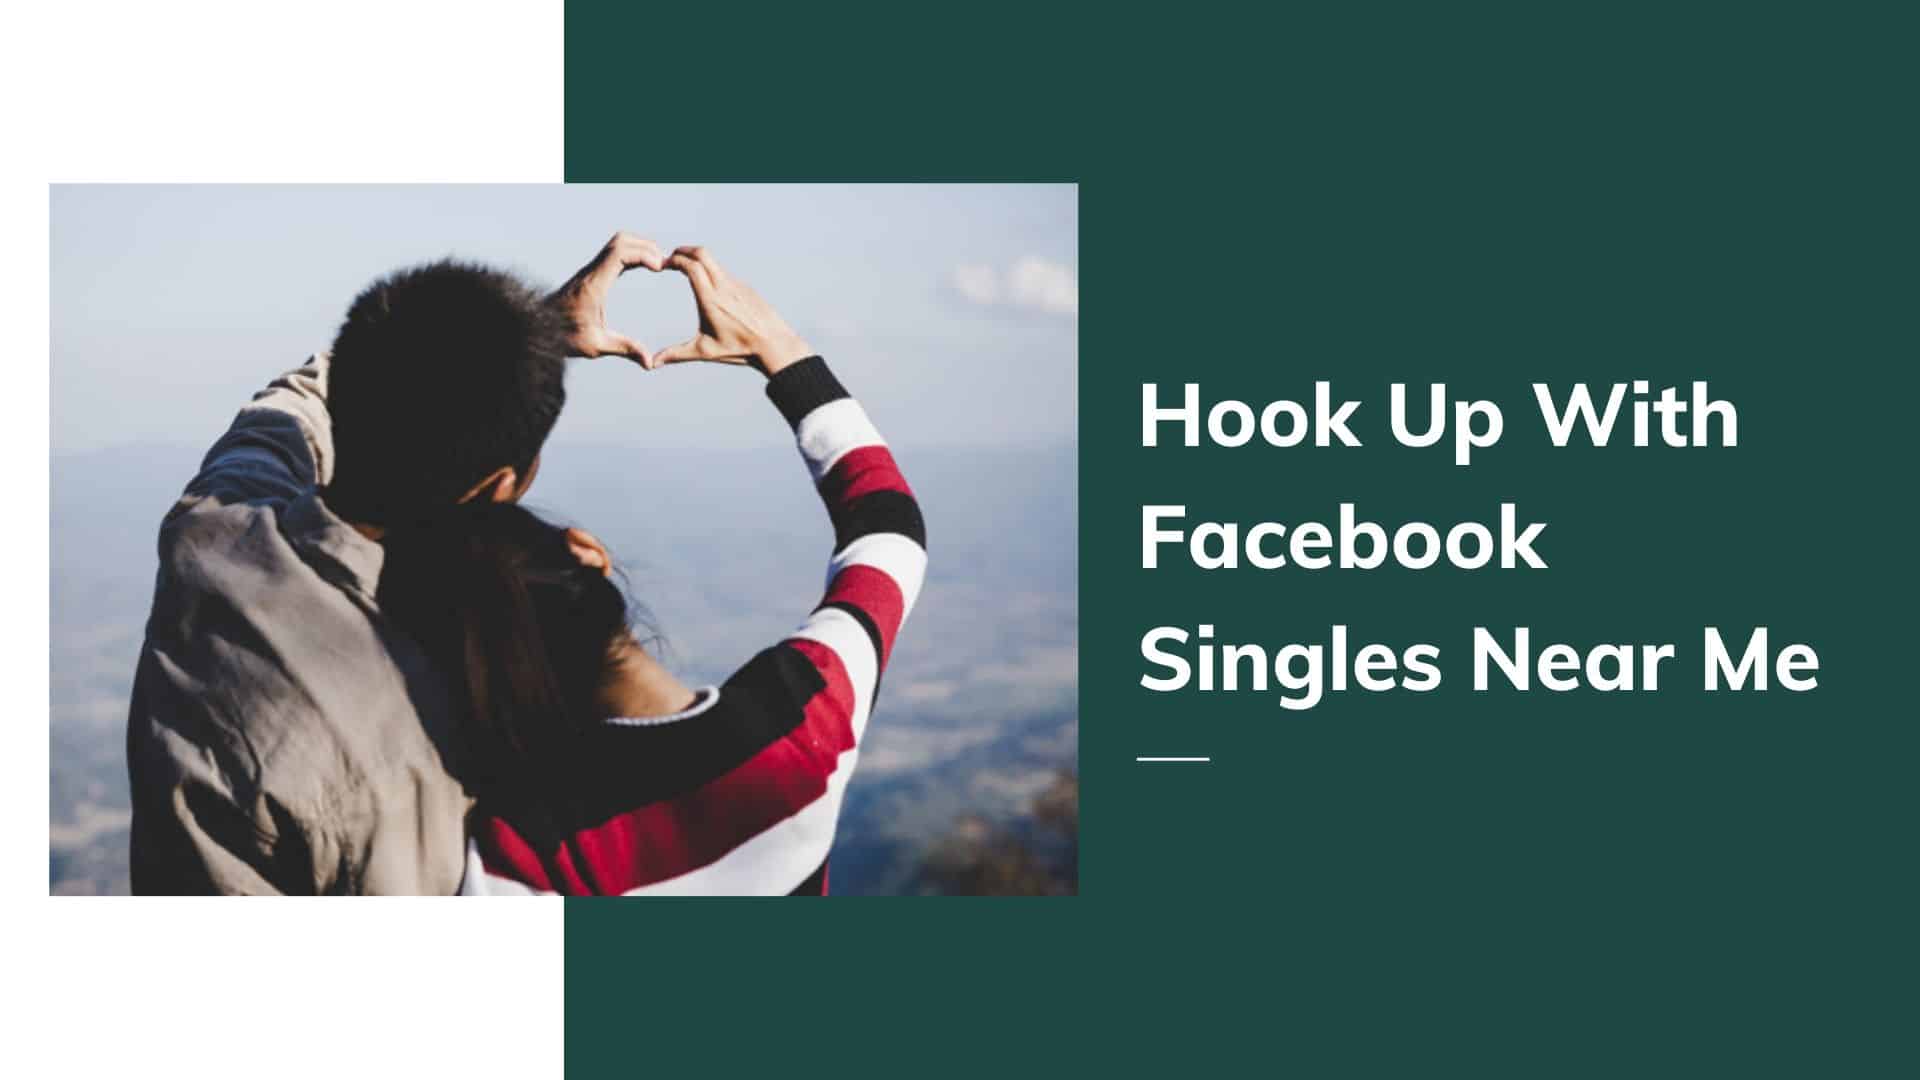 Hook-Up-With-Facebook-Singles-Near-Me.jp